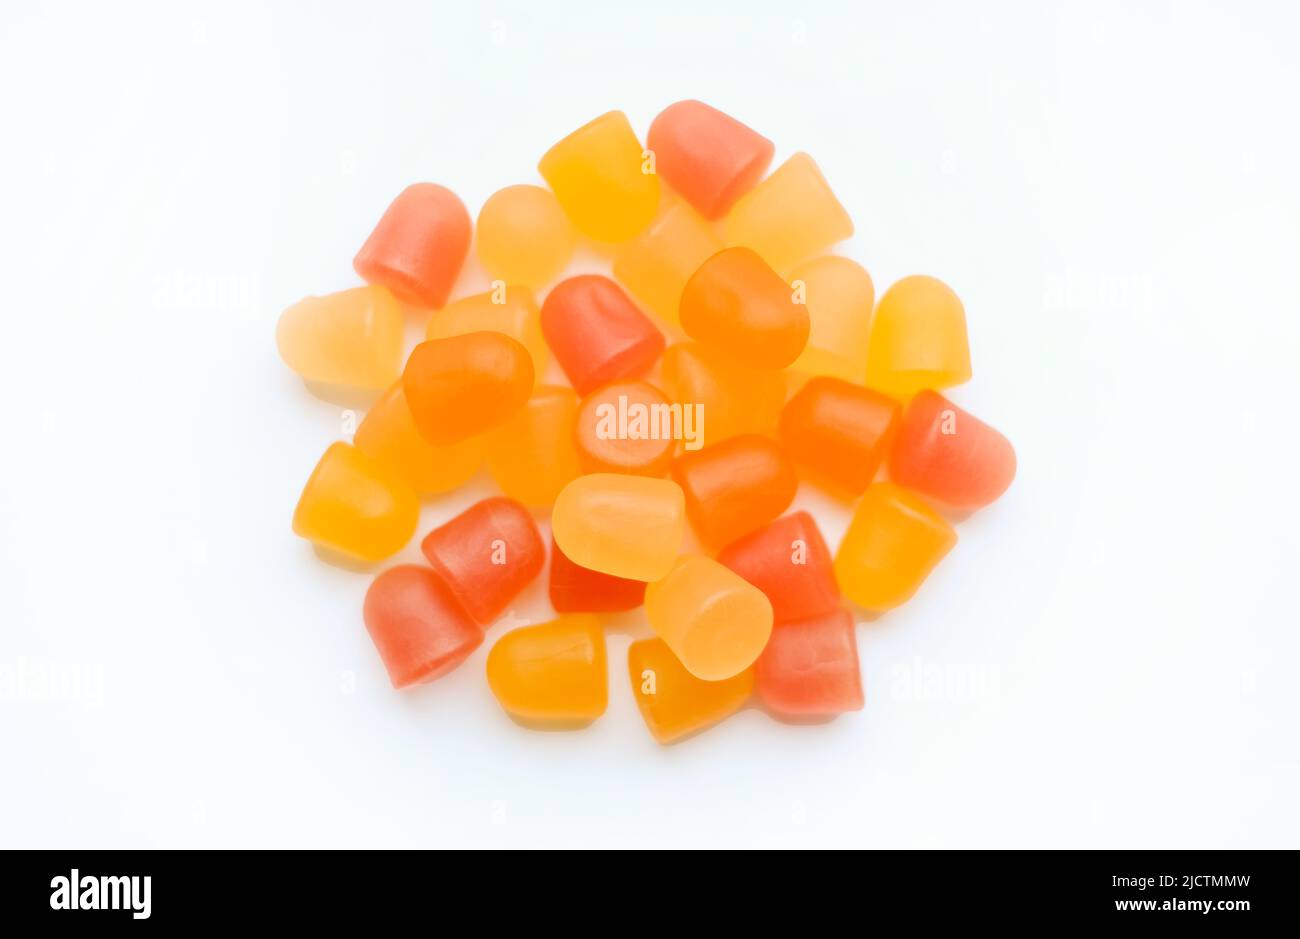 Close-up texture of orange and yellow multivitamin gummies in the form of bears on white background.  Stock Photo